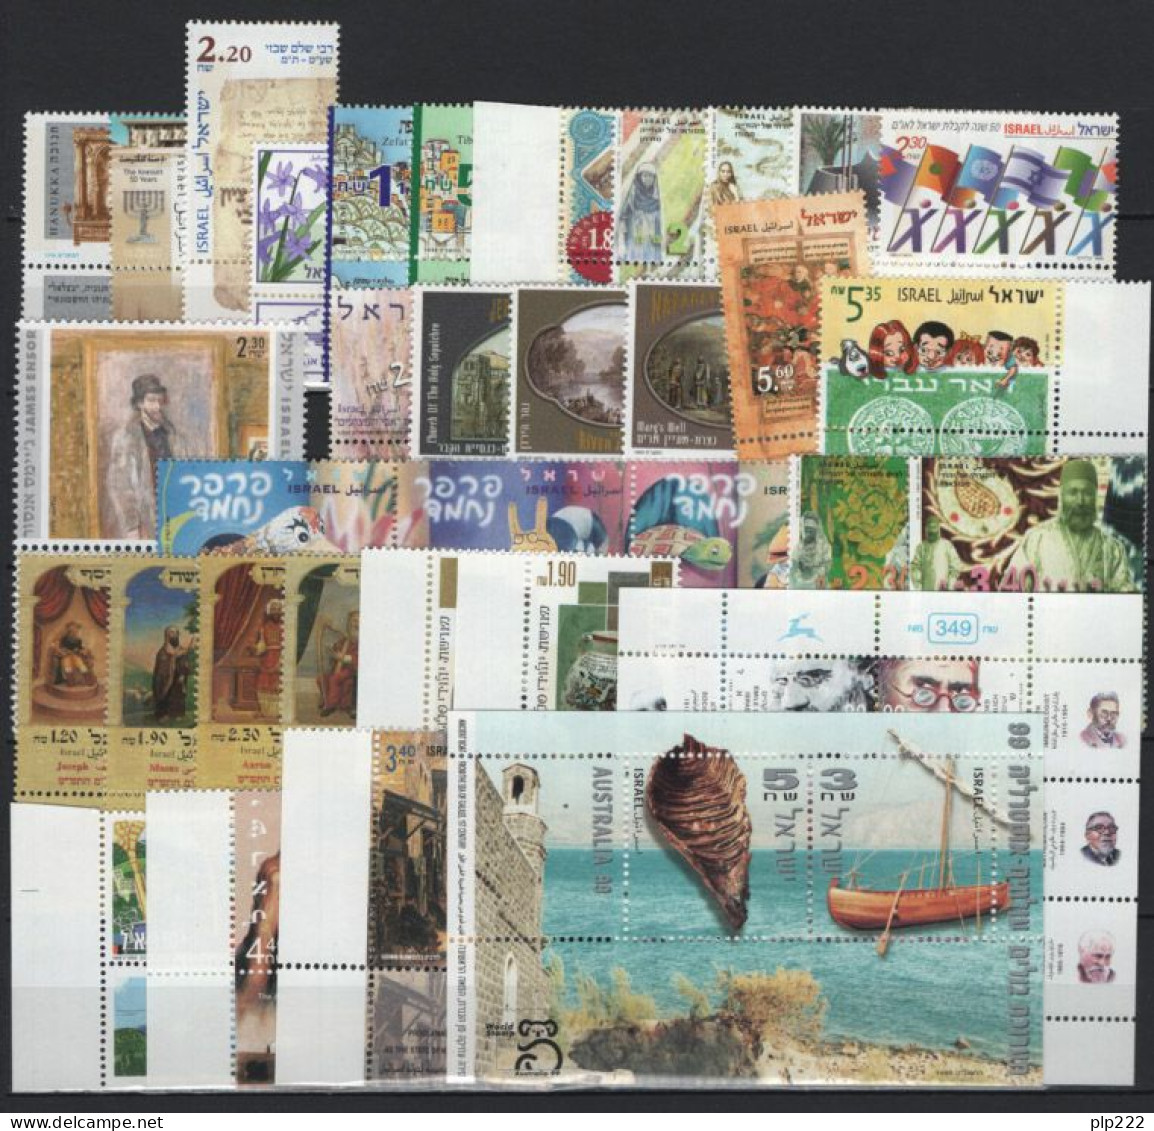 Israele 1999 Annata Completa Con Appendice / Complete Year Set With Tab **/MNH VF - Annate Complete